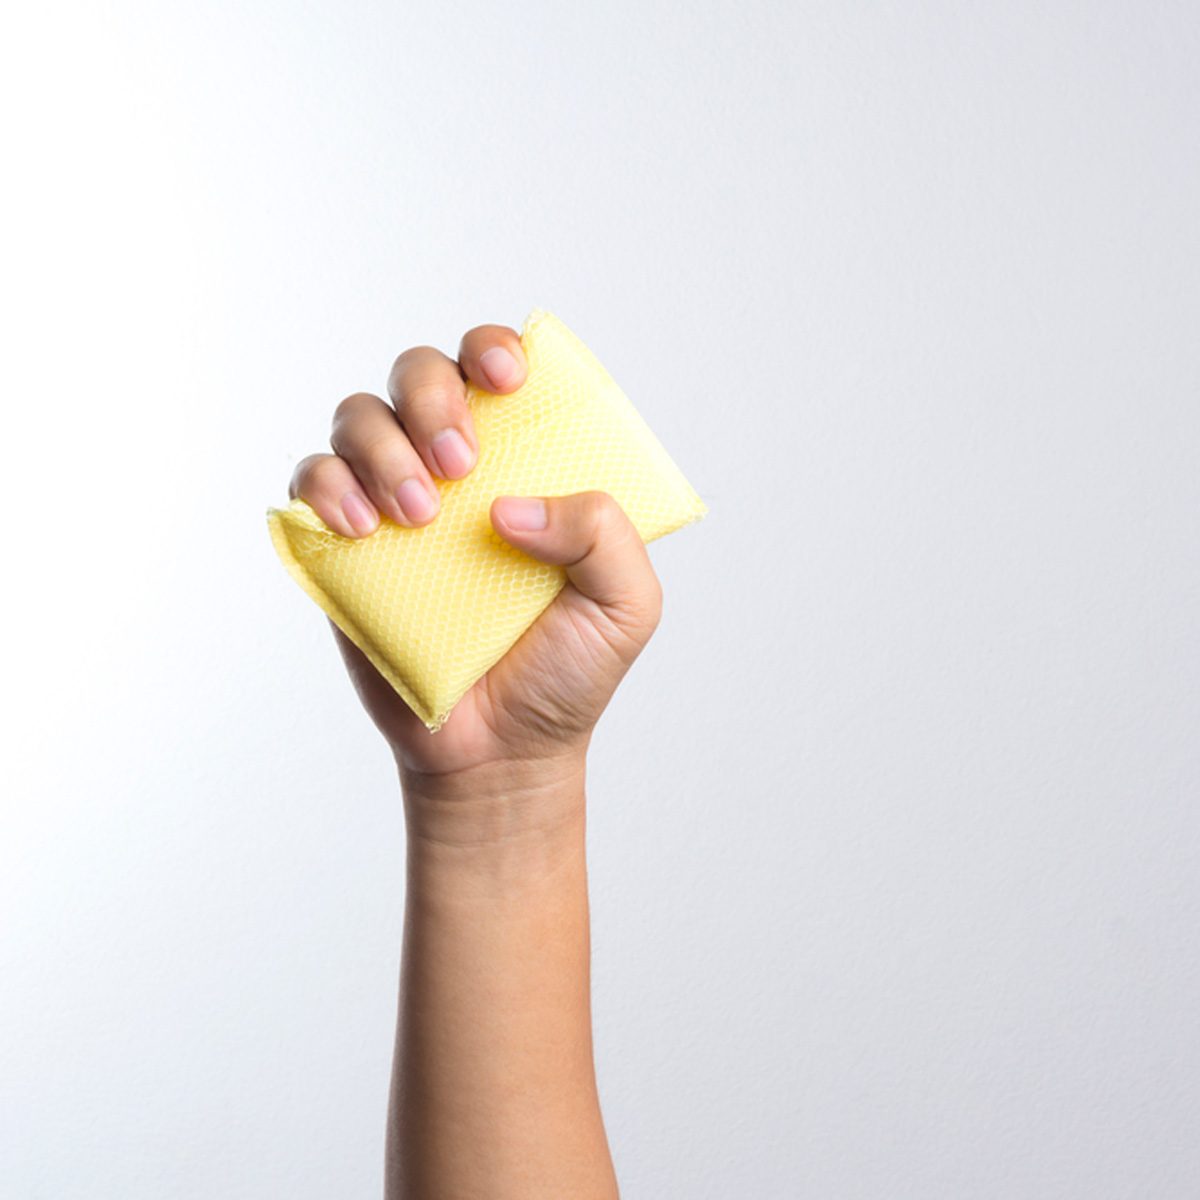 Cleaning a Sponge to Avoid That Smell